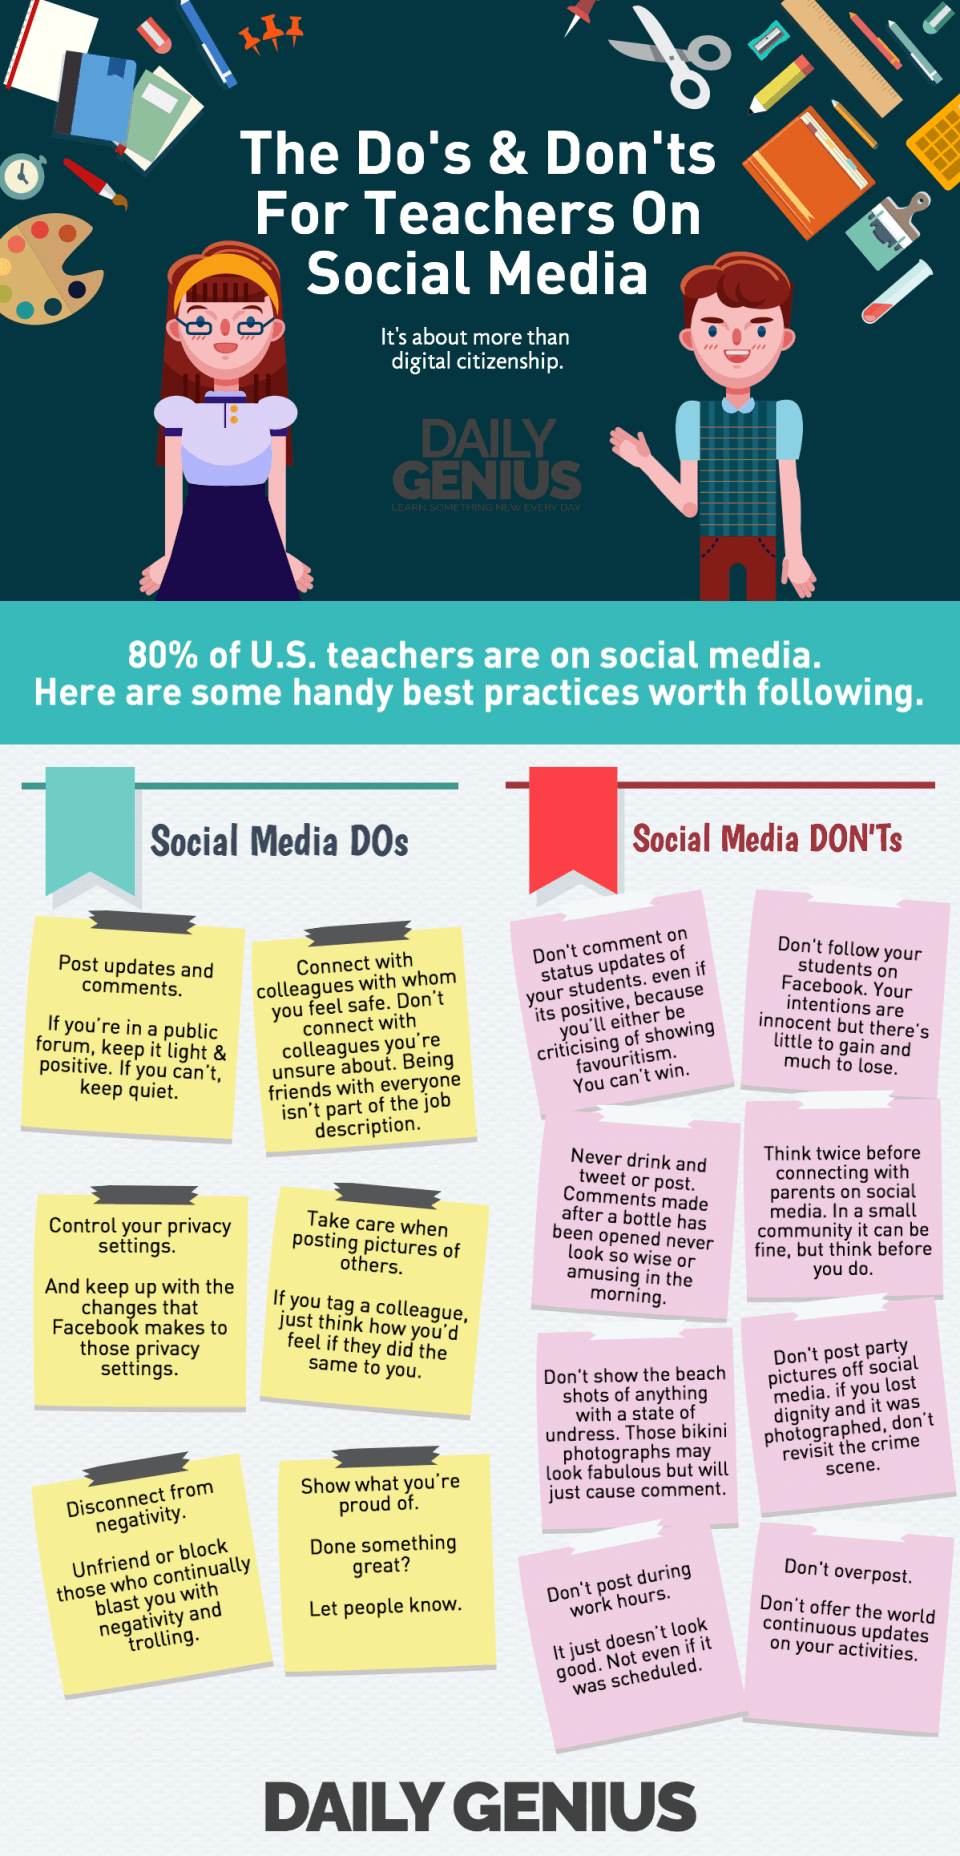 The Do's and Don'ts for Teachers on Social Media Infographic